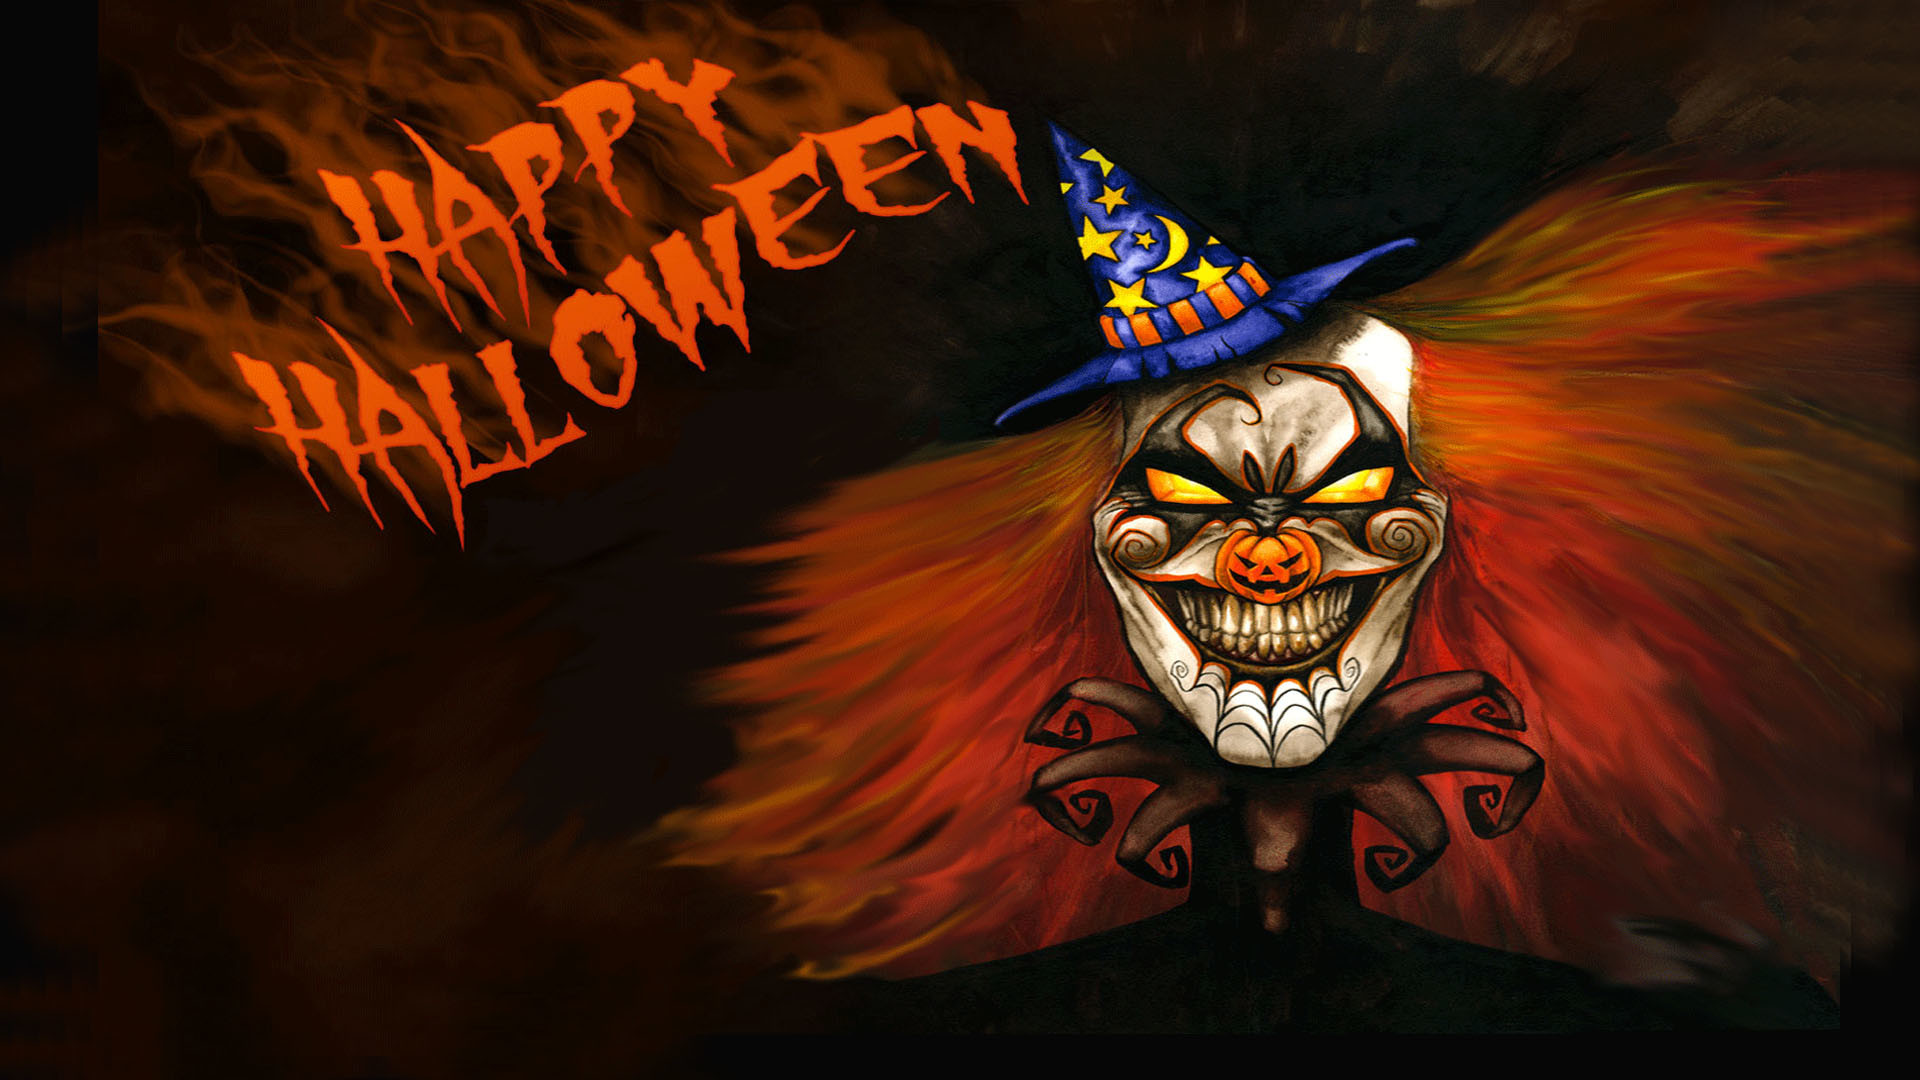  download 77 Halloween Wallpapers on WallpaperPlay [1920x1080 1920x1080